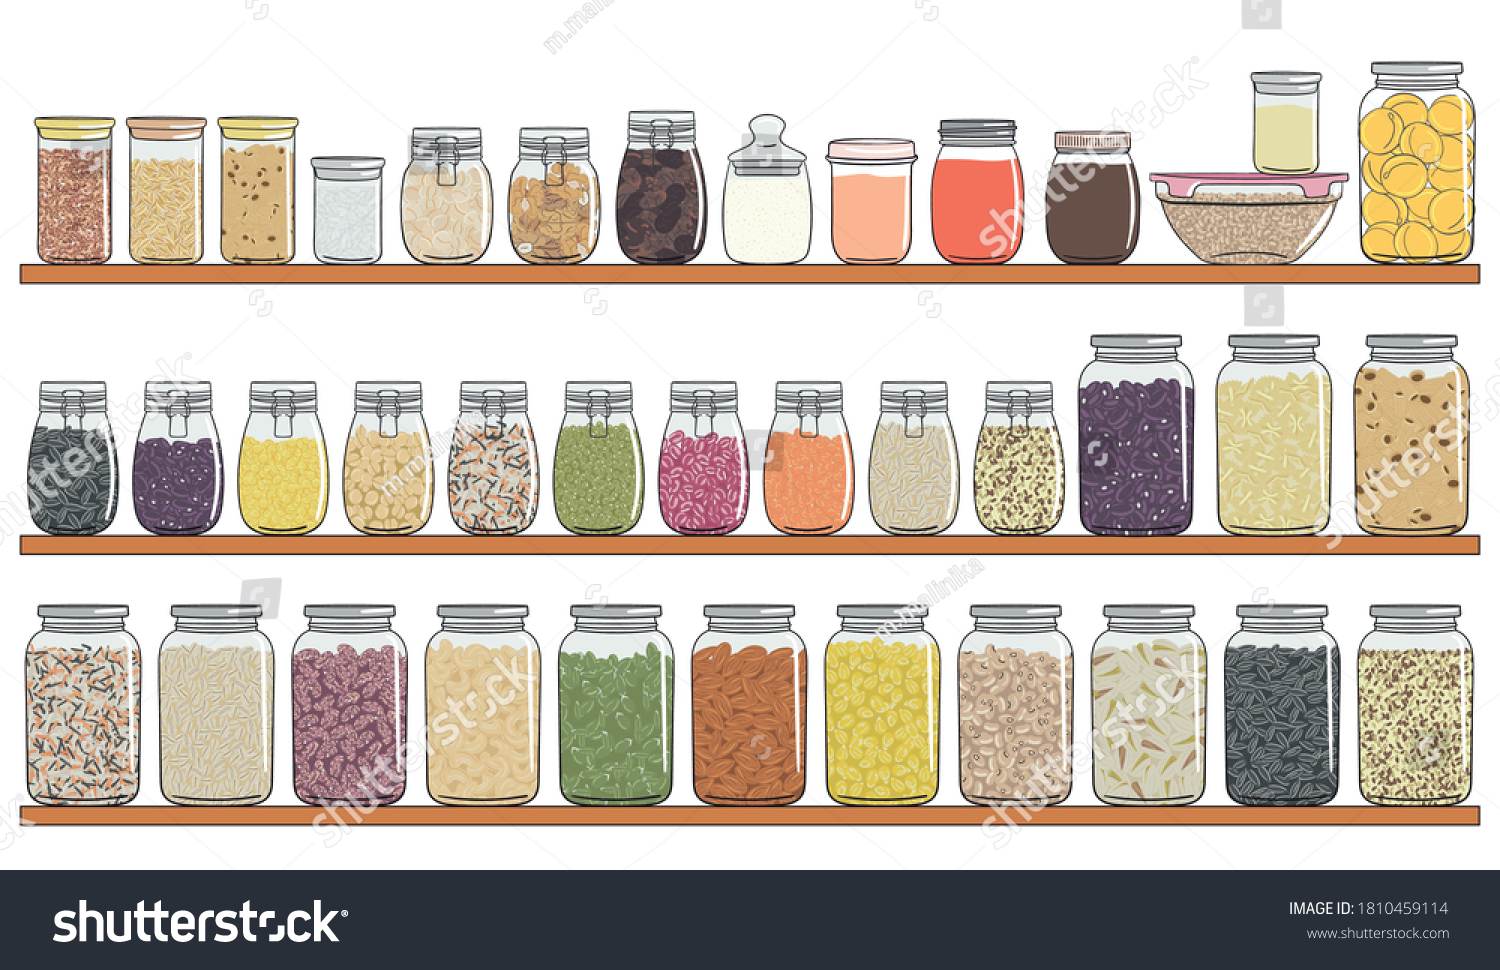 SVG of Set of different types of jars with grains, nuts, seeds beans on shelf. Elements of kitchen storage. Zero waste, no plastic concept. Hand drawn vector illustration. Isolated on white background. svg